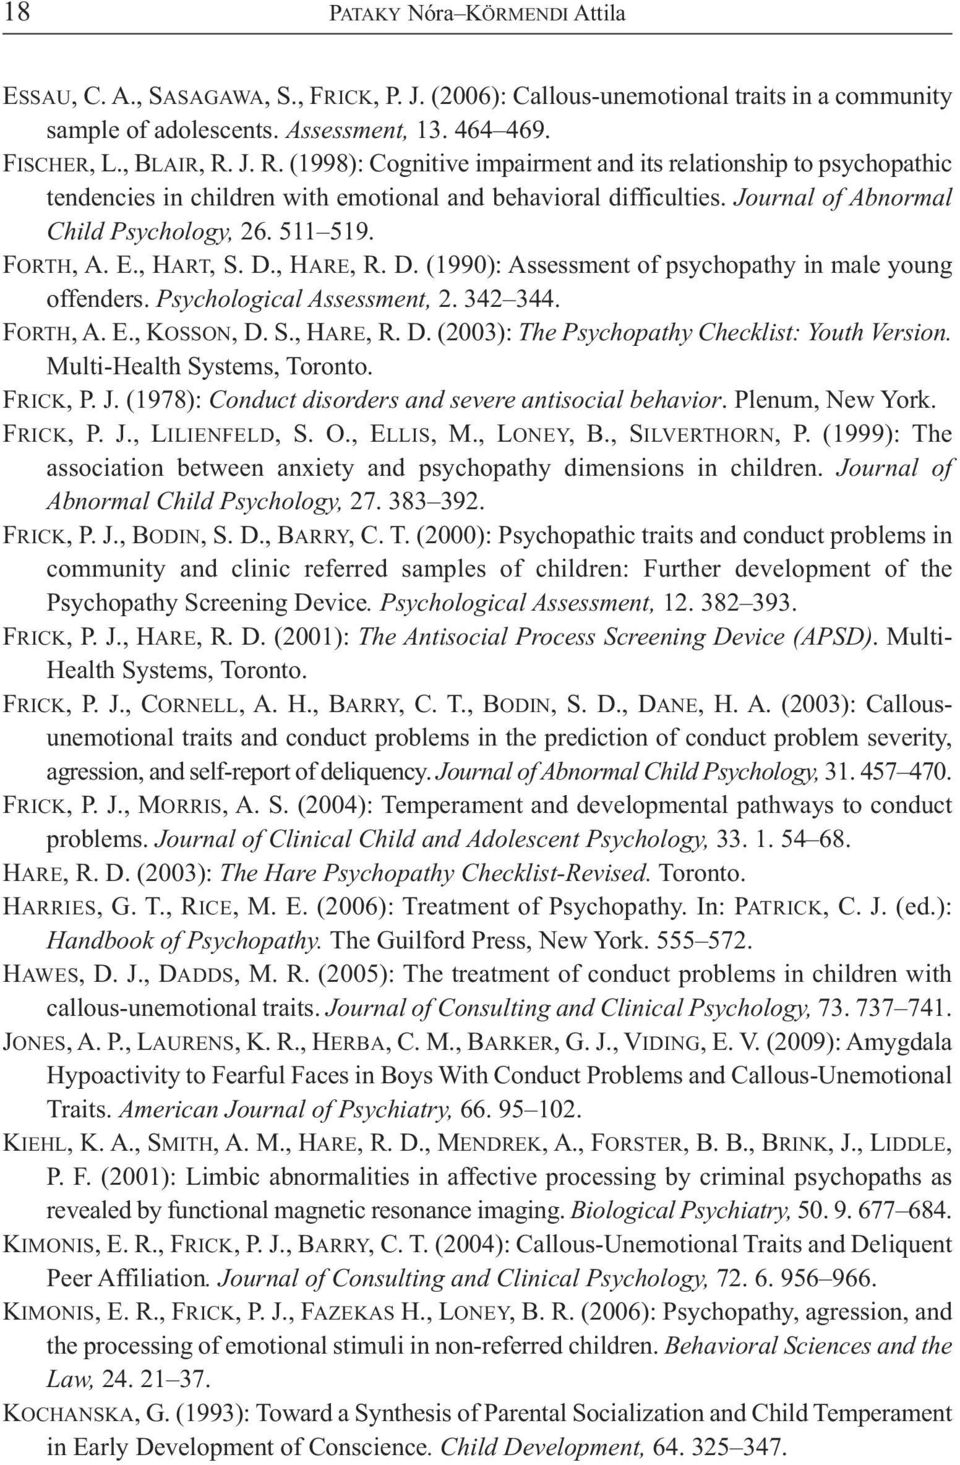 E., HART, S. D., HARE, R. D. (1990): Assessment of psychopathy in male young offenders. Psychological Assessment, 2. 342 344. FORTH, A. E., KOSSON, D. S., HARE, R. D. (2003): The Psychopathy Checklist: Youth Vers ion.